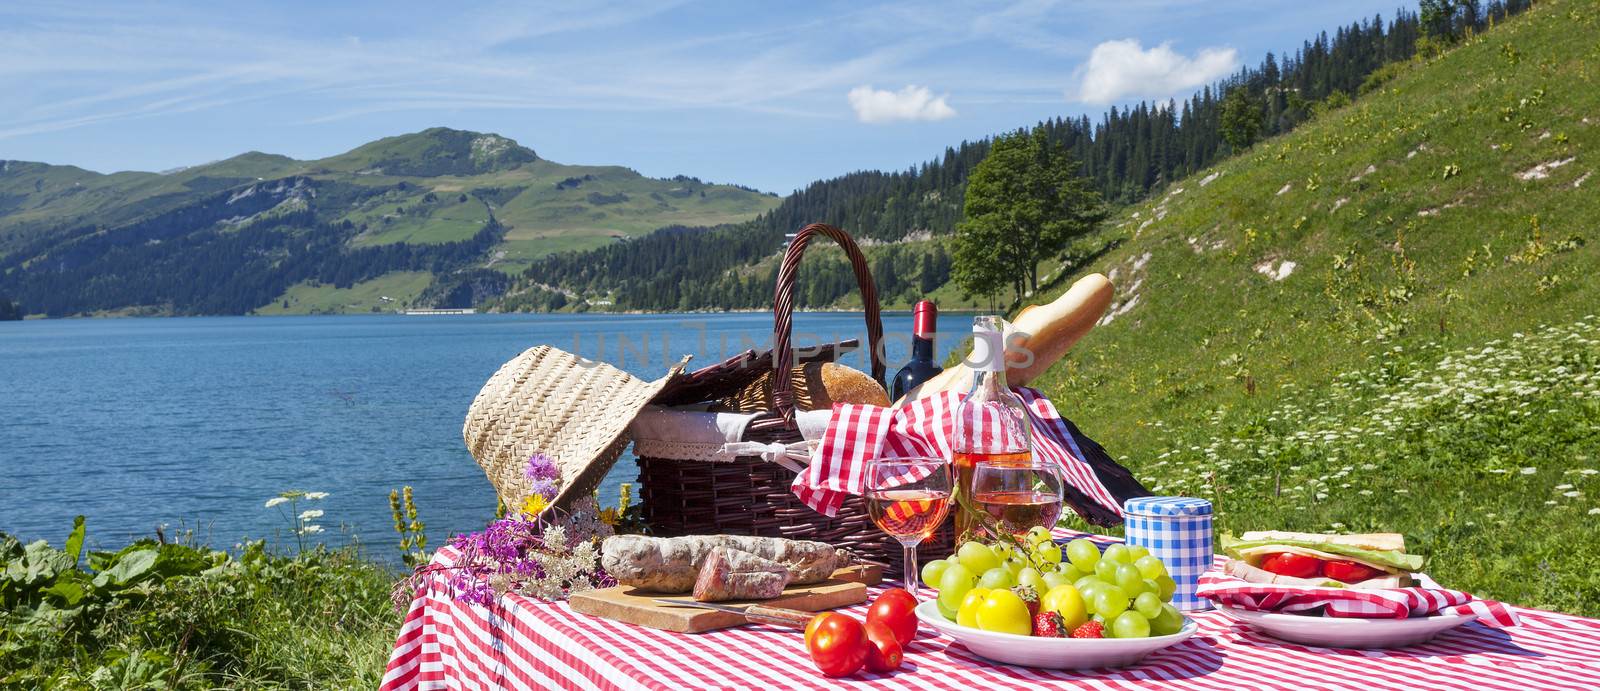 Picnic in french alps with lake, panoramic view